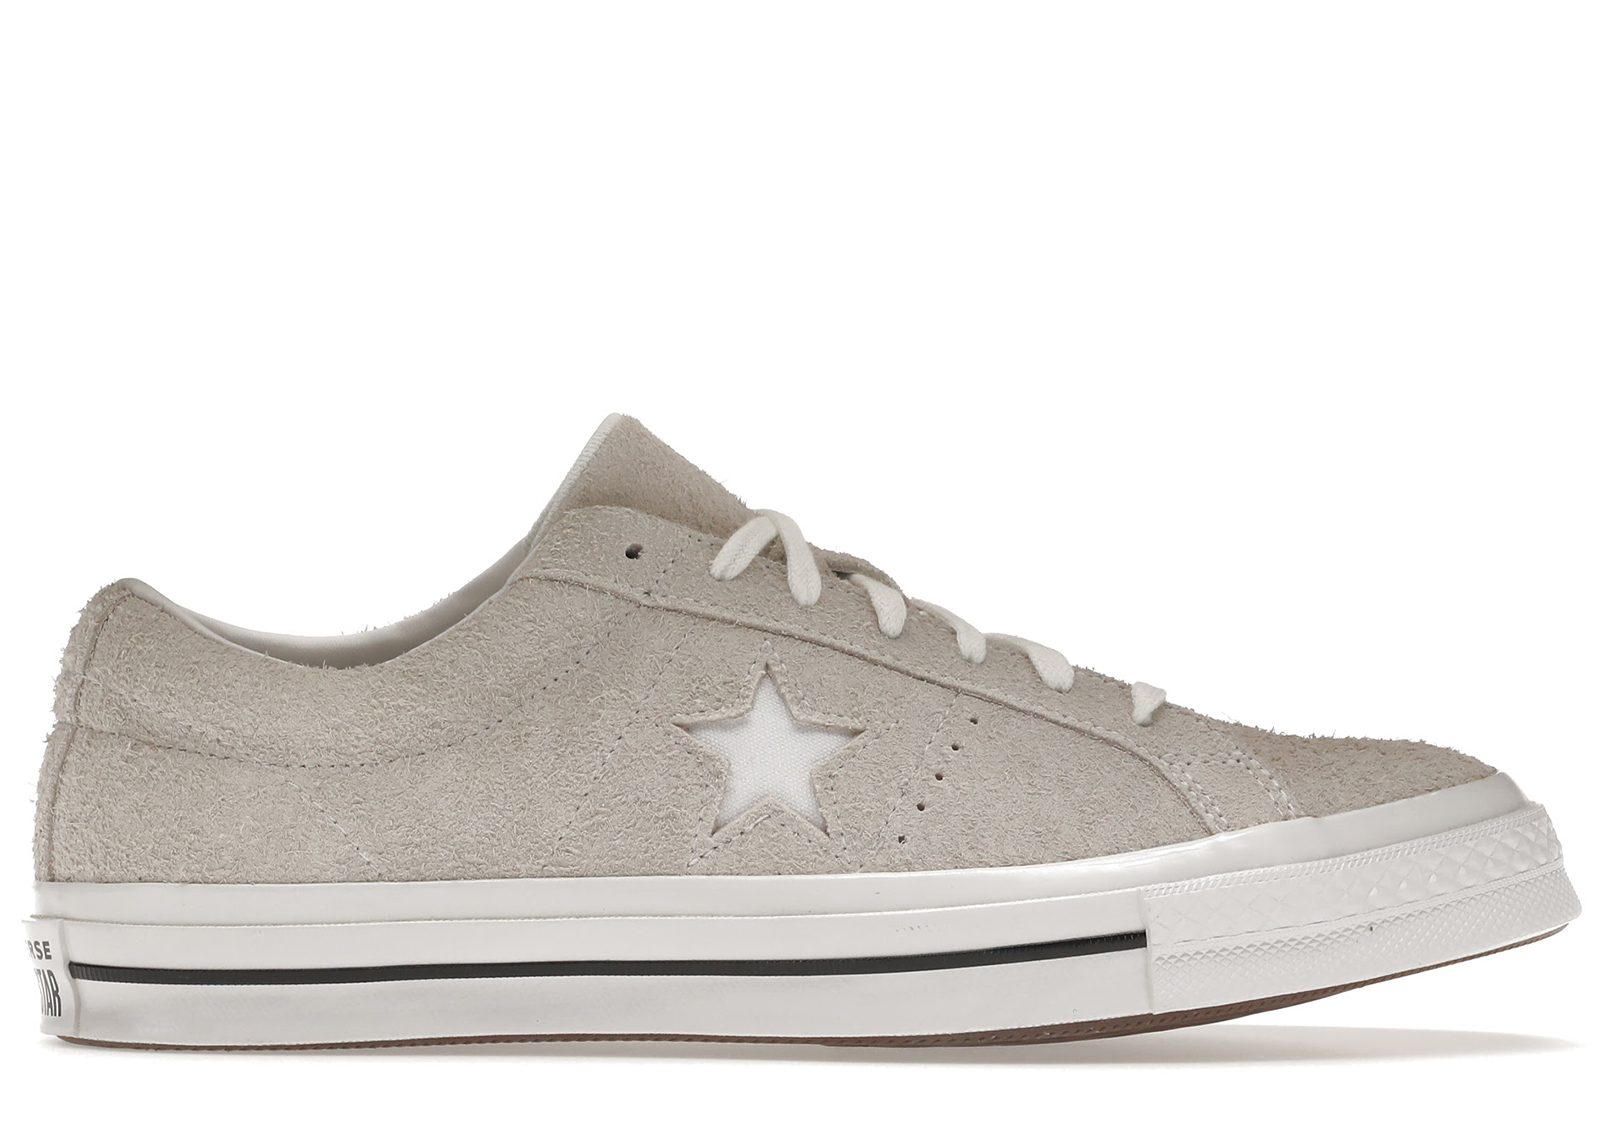 Converse One Star Ox Vintage White - 161577C - US